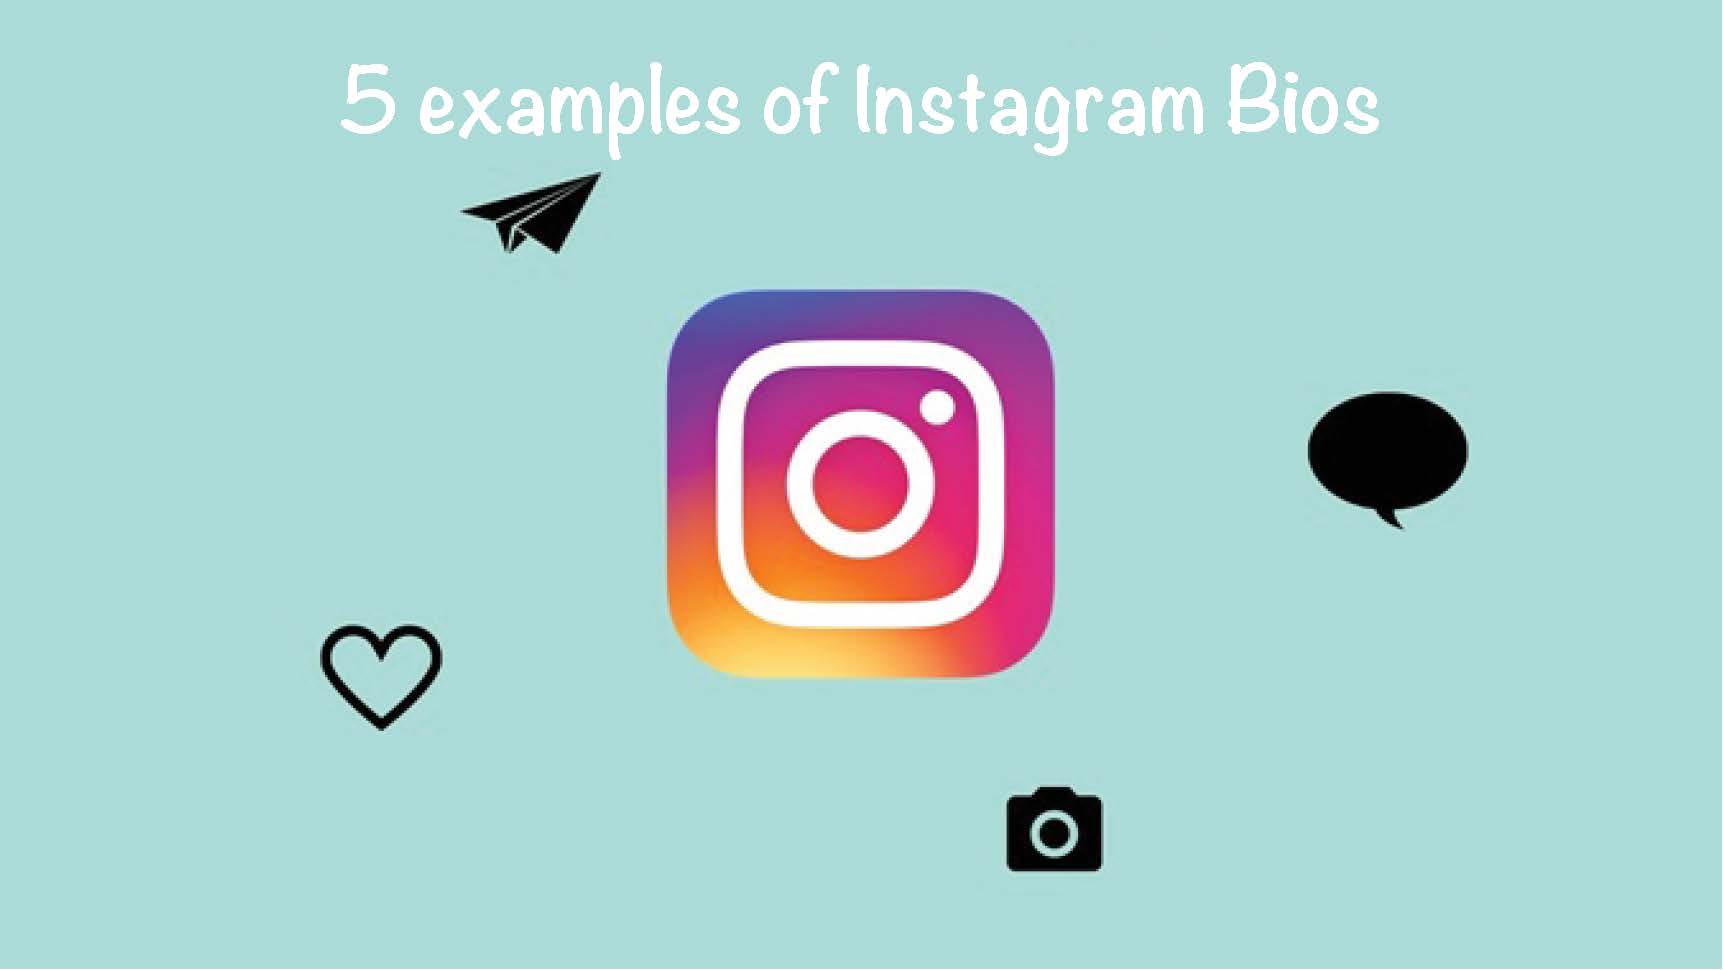 5 examples of Instagram Bios to copy and paste | anotherfollower